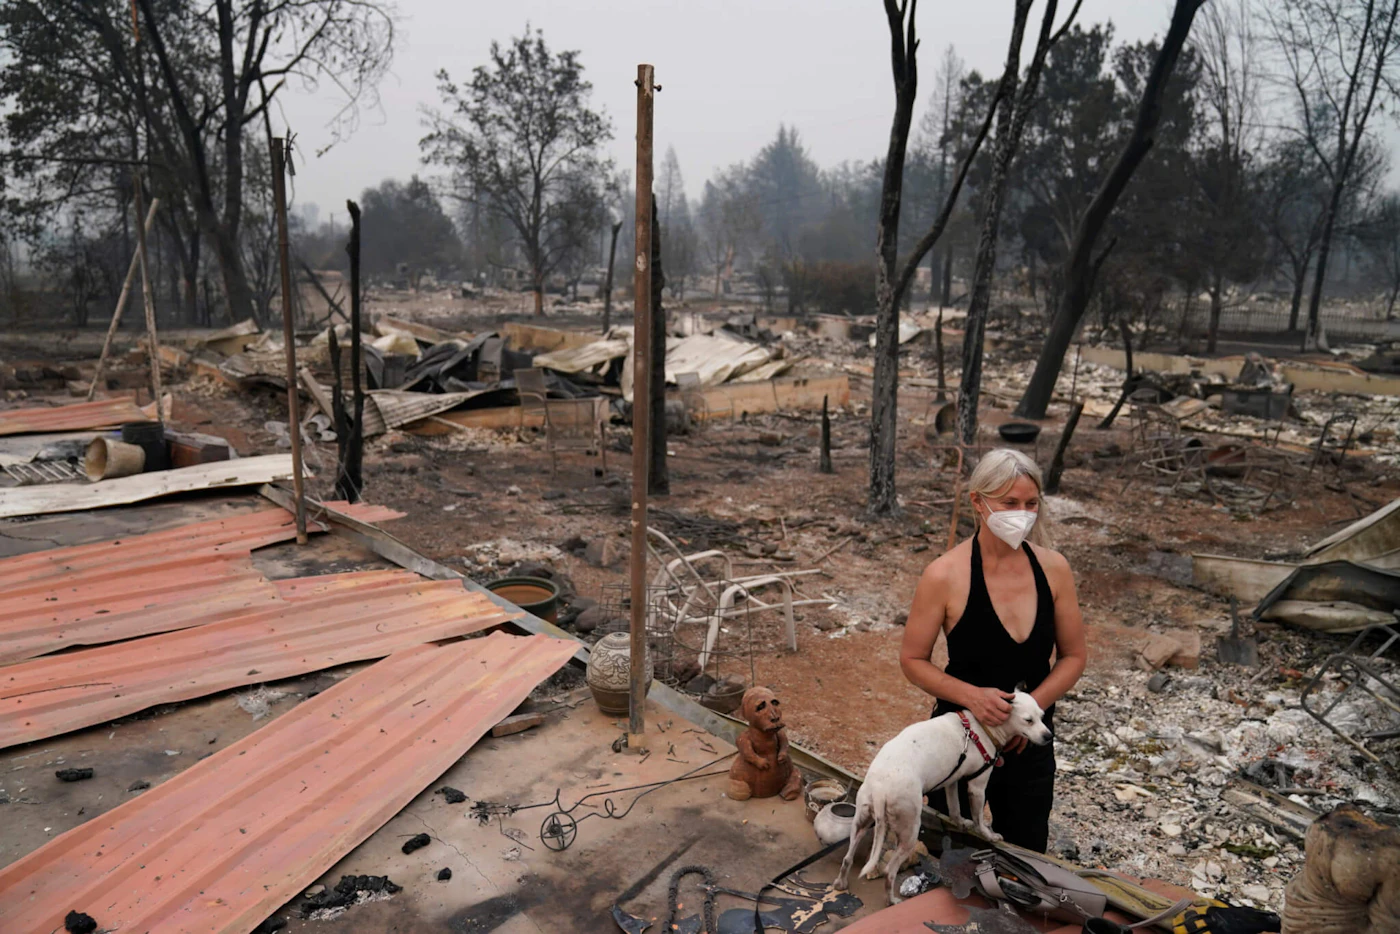 Eden McCarthy pets her dog Hina in the rubble of her home destroyed by the Almeda Fire, Thursday, Sept. 10, 2020, in Talent, Ore. (AP Photo/John Locher)